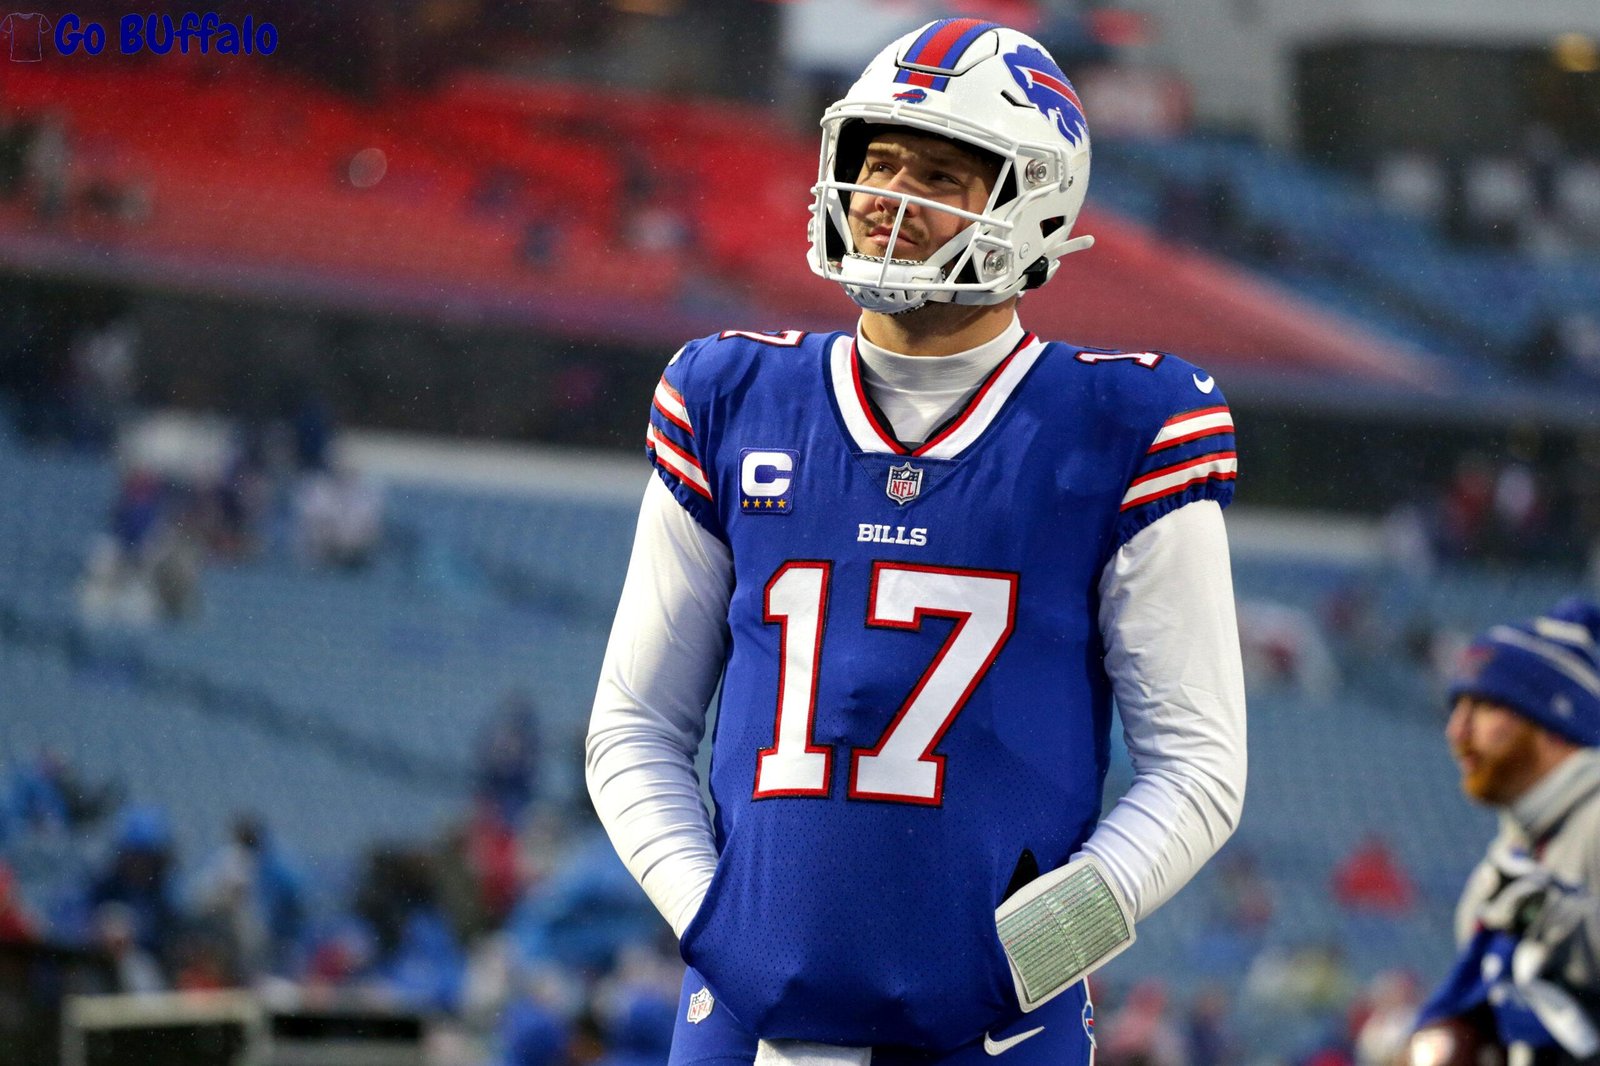 ORCHARD PARK, NEW YORK - DECEMBER 11: Josh Allen #17 of the Buffalo Bills warms up prior to a game against the New York Jets at Highmark Stadium on December 11, 2022 in Orchard Park, New York. (Photo by Joshua Bessex/Getty Images)